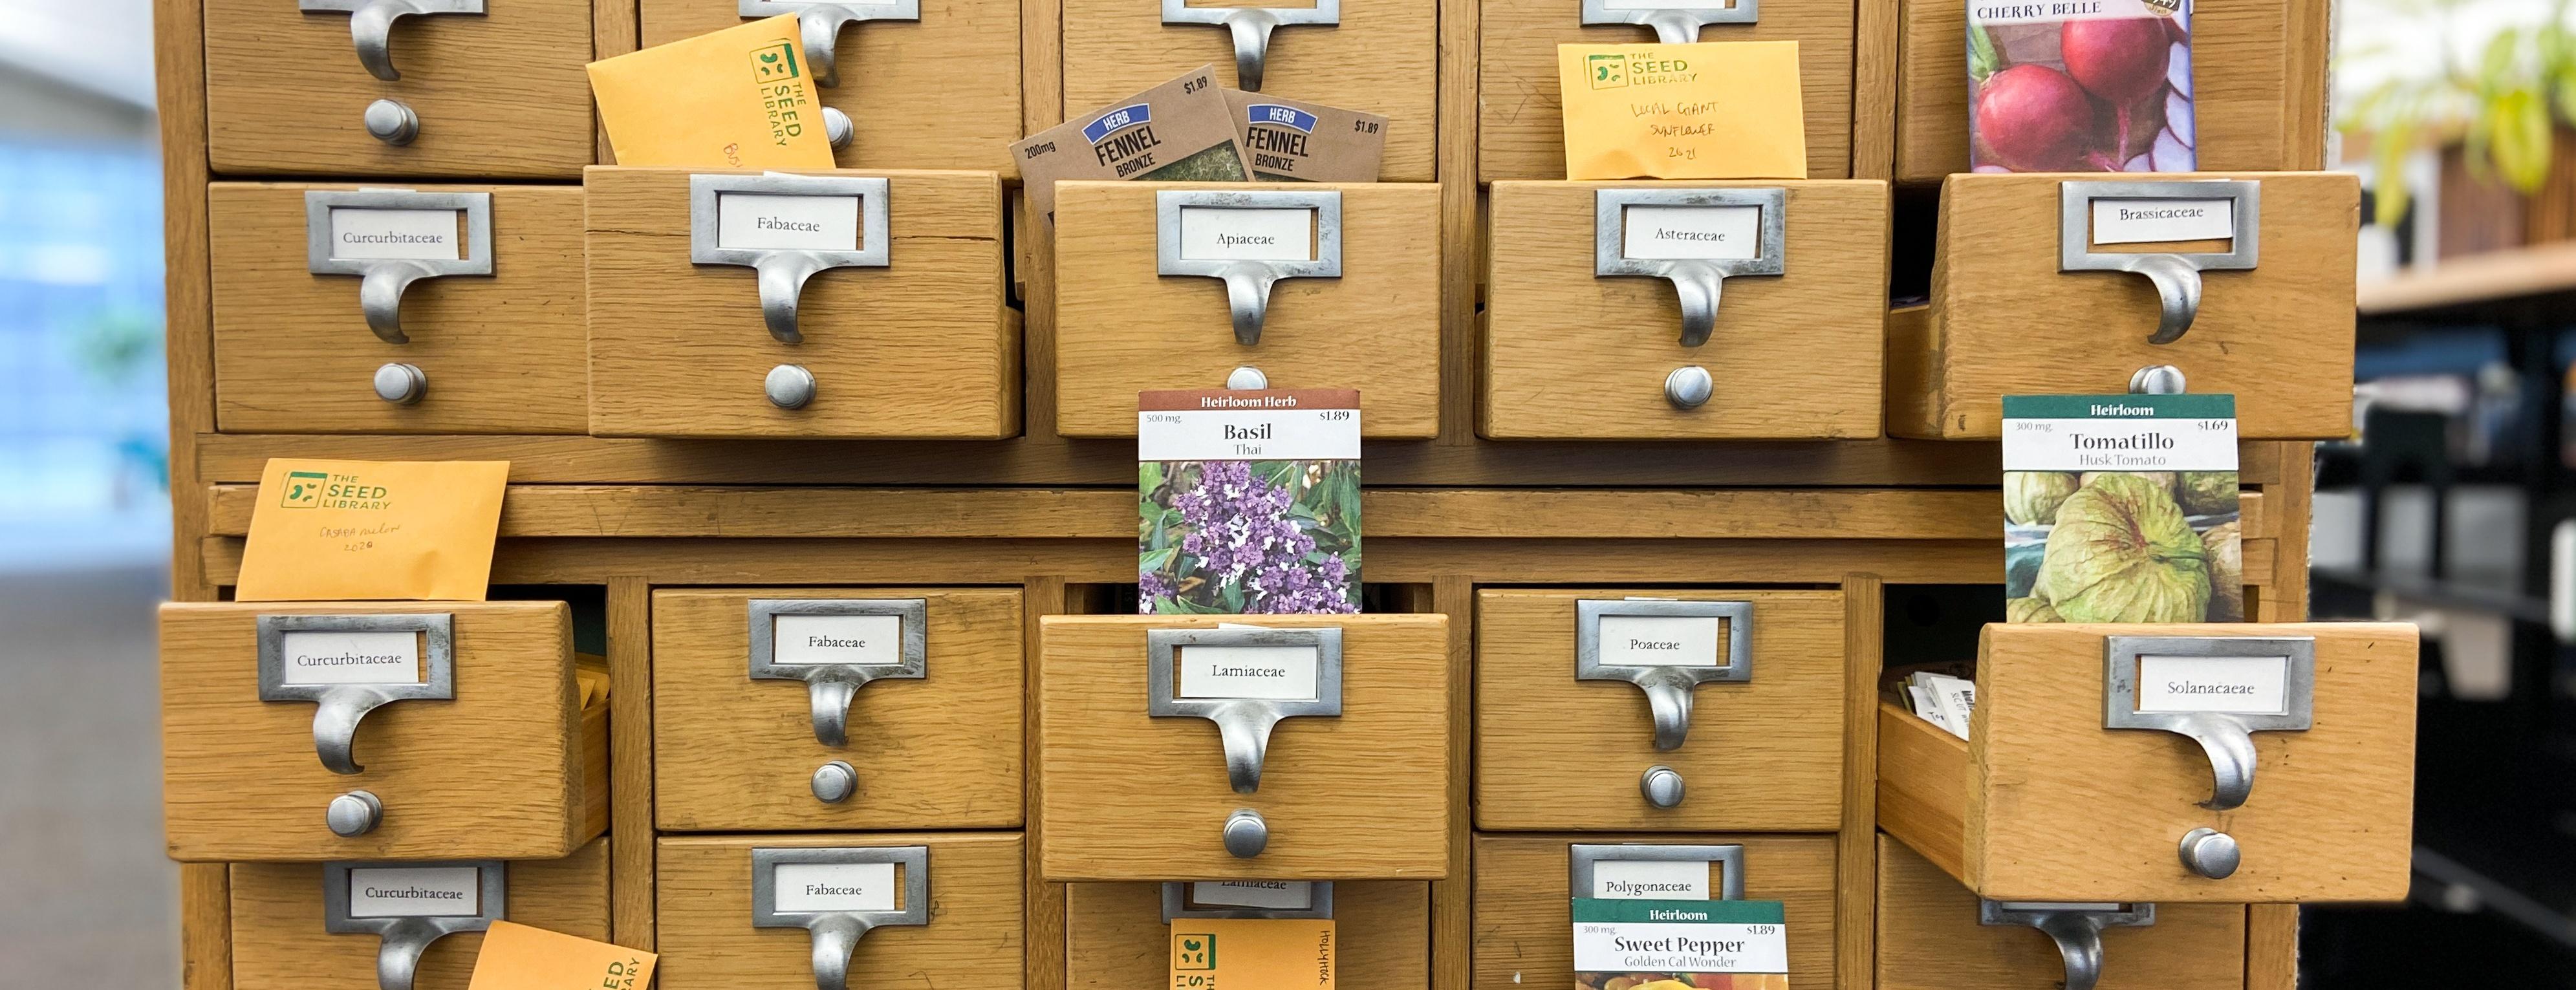 Salt Lake City librarian cares for library's bees in backyard